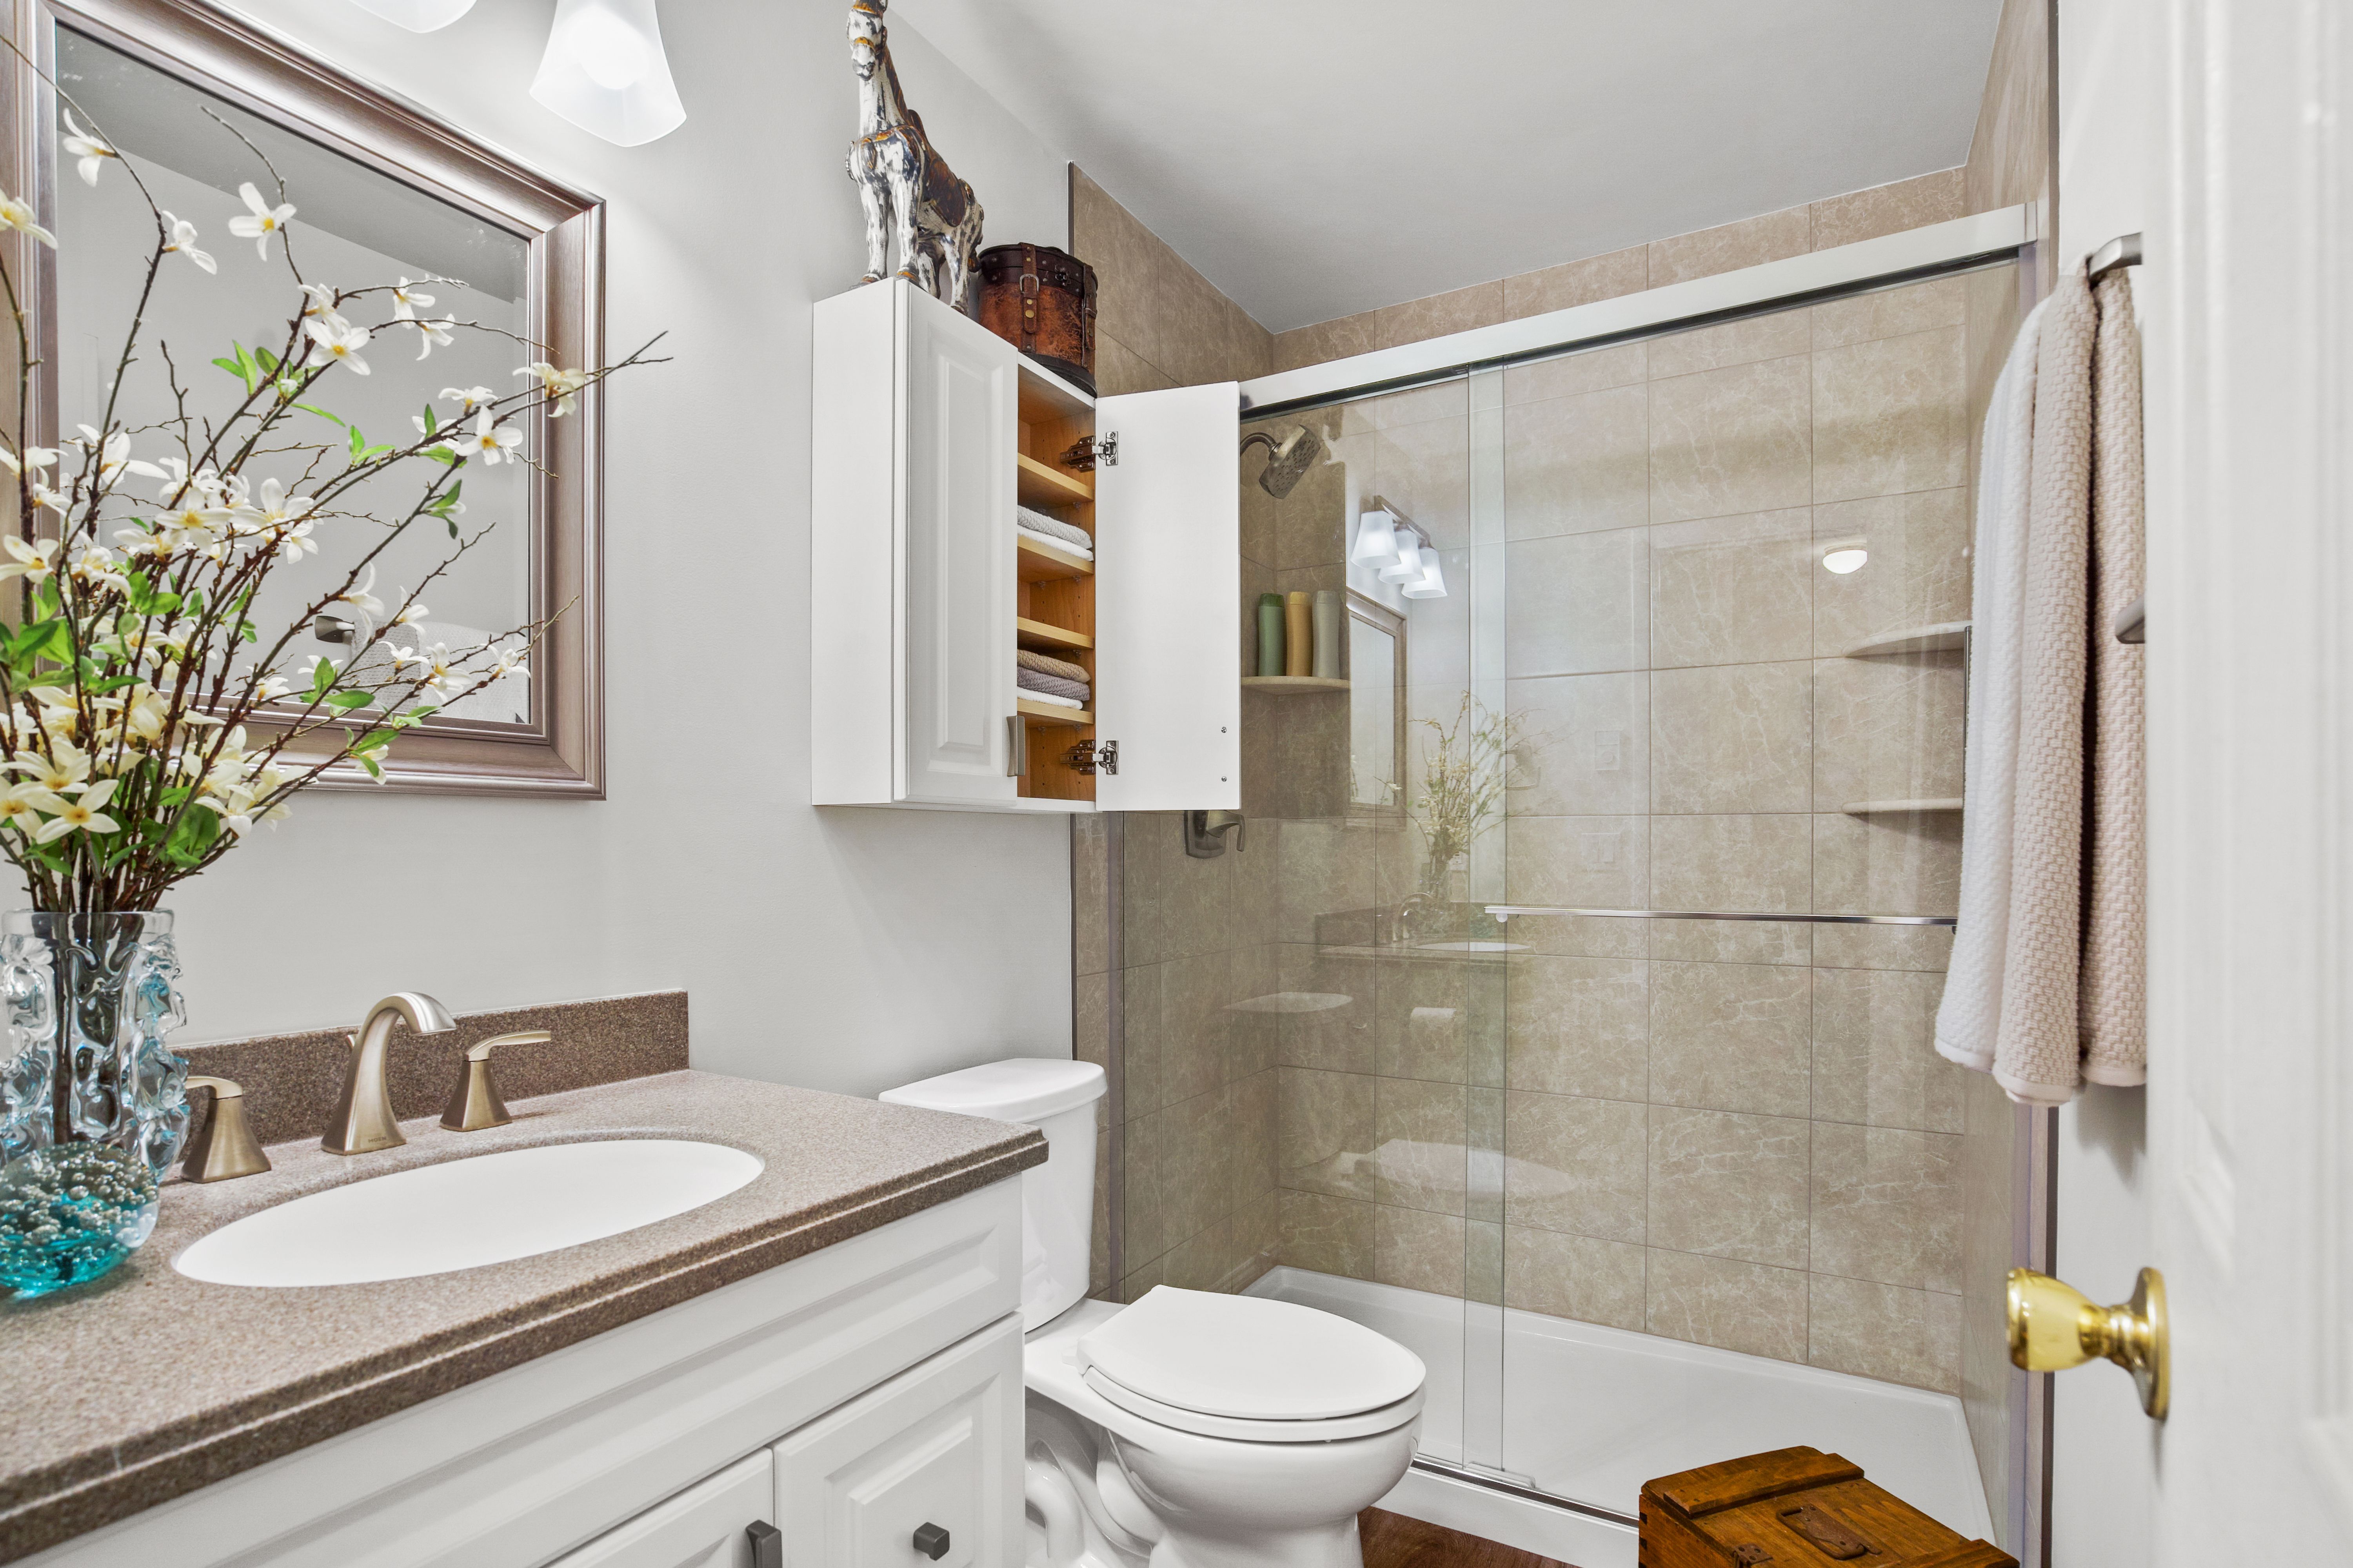 7 Tips for Selecting the Perfect Sink for Bathroom Remodels